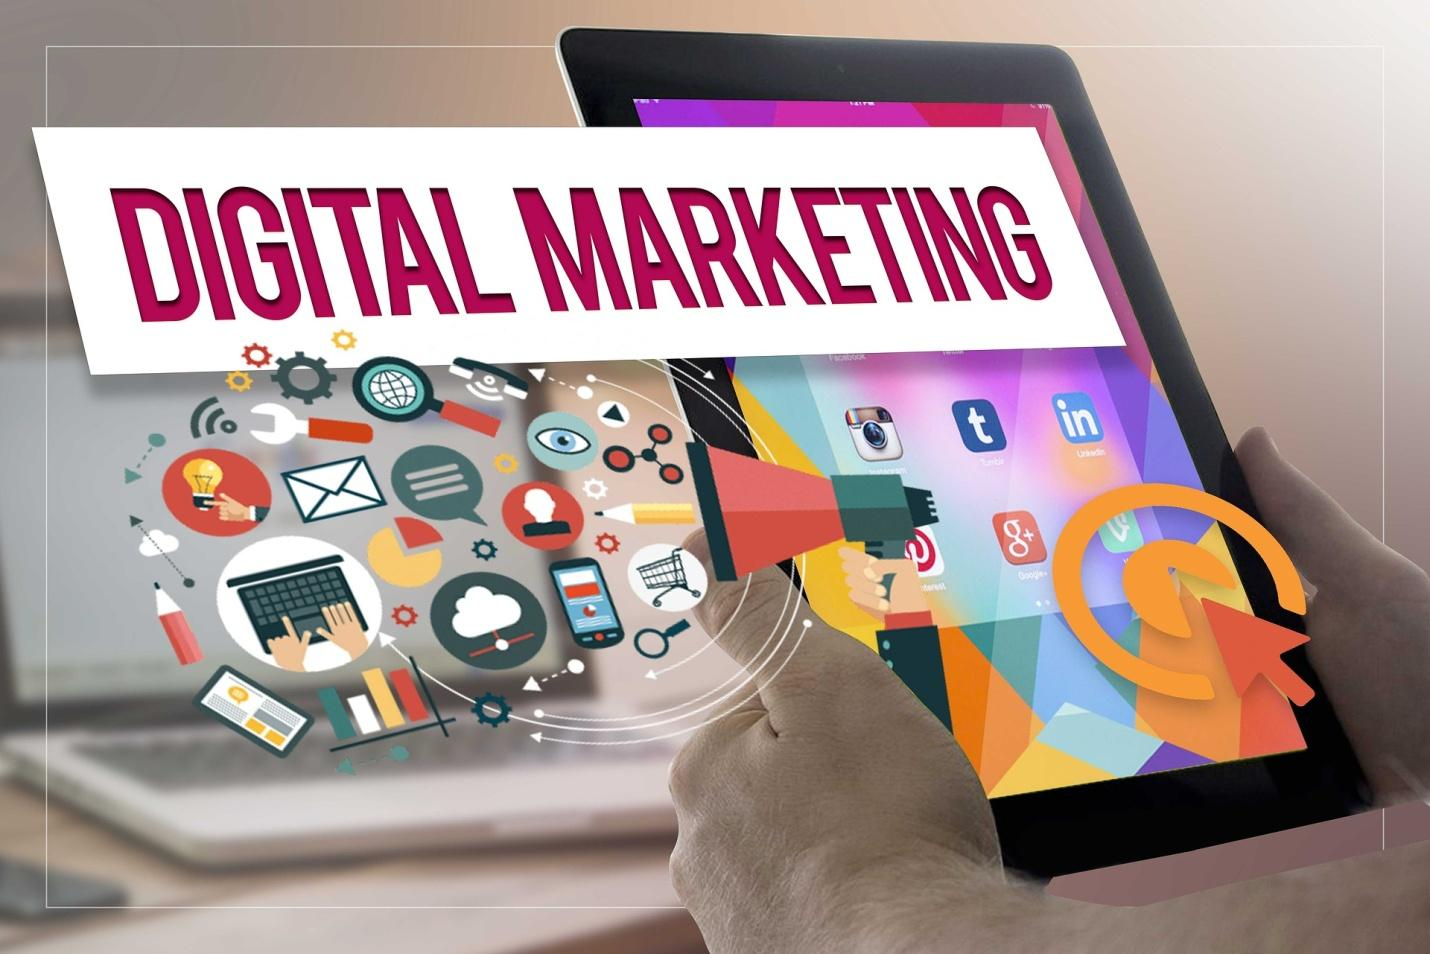 What is the role of digital marketing in e-commerce?